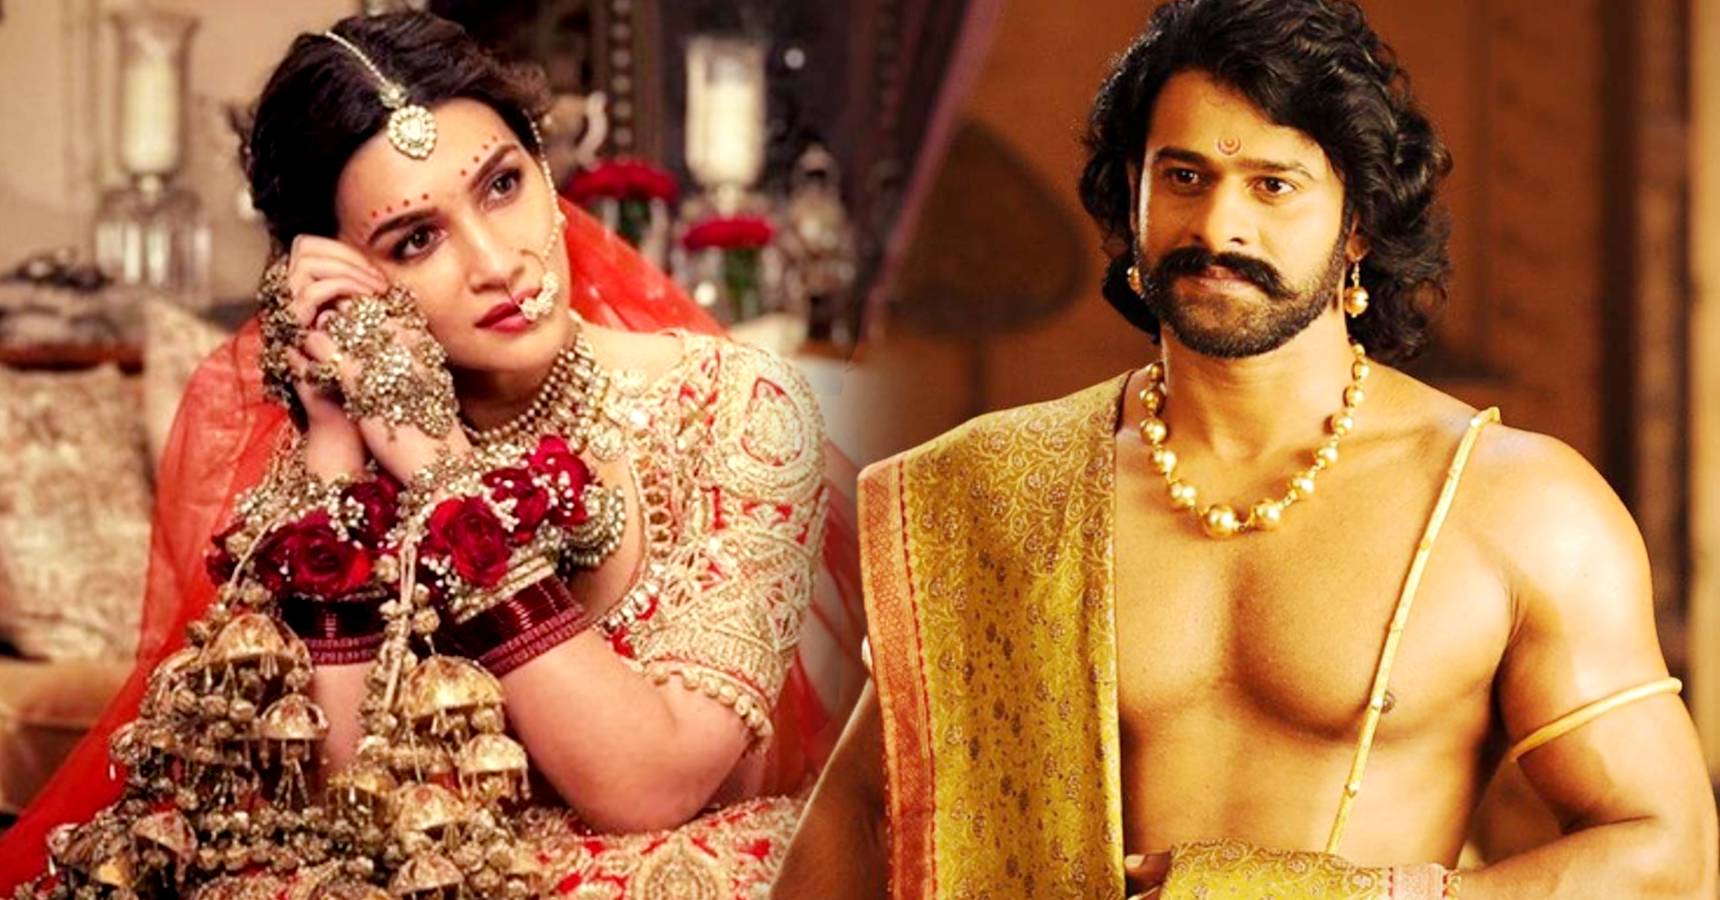 South Indian actor Prabhas opens up about marriage amid dating rumours with Kriti Sanon